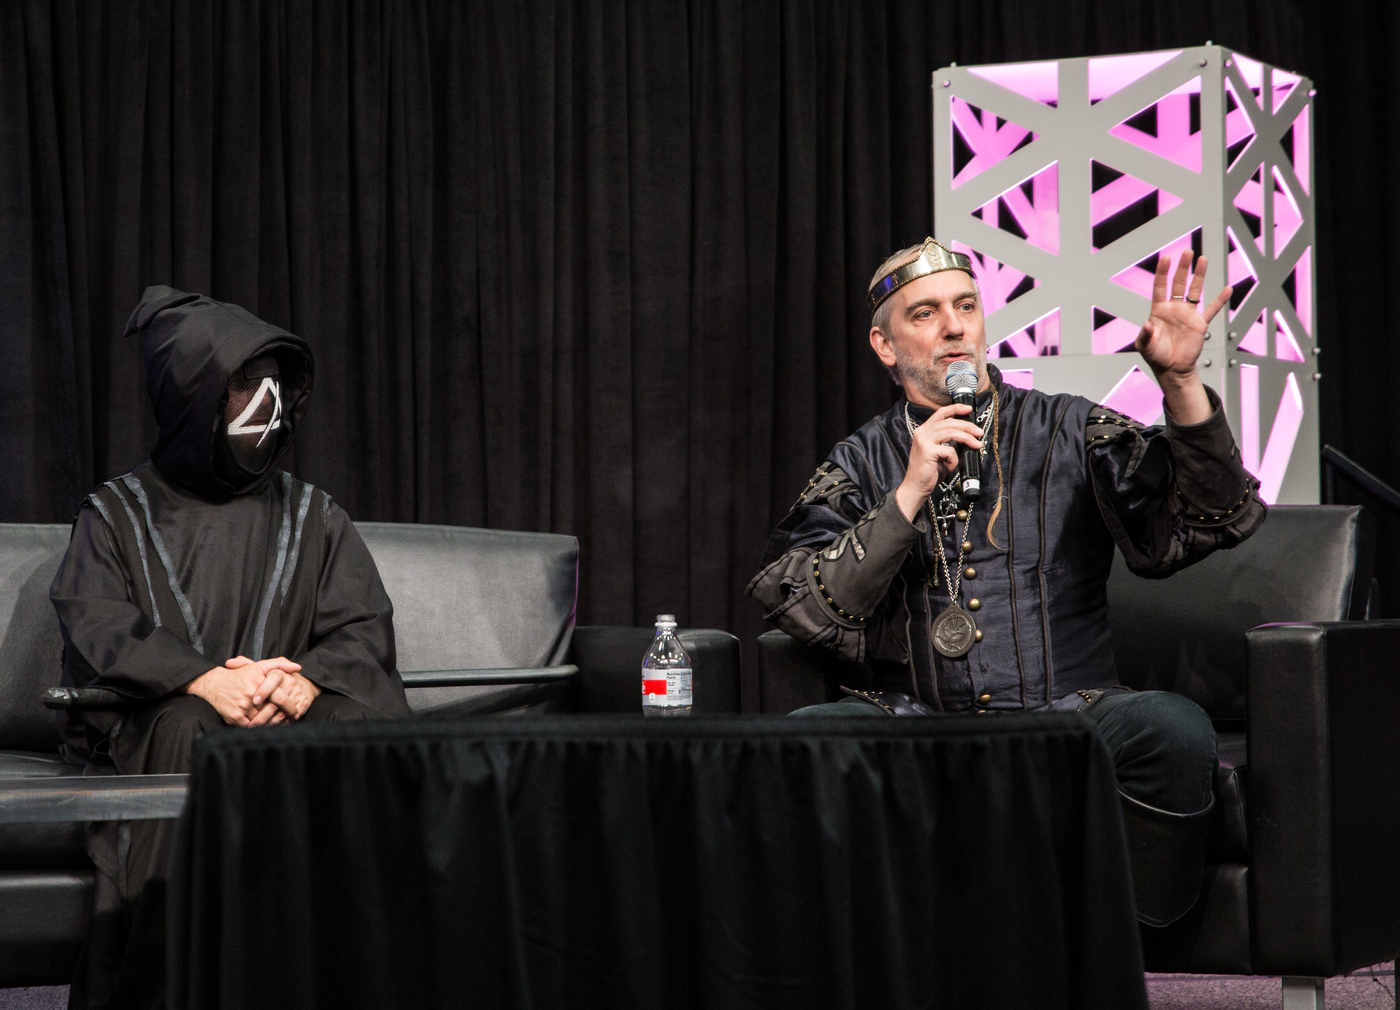 Sarah Dworken and Richard Garriott at It's Here! Shroud of the Avatar and What's Coming Next. Photo by Jessica Stamp